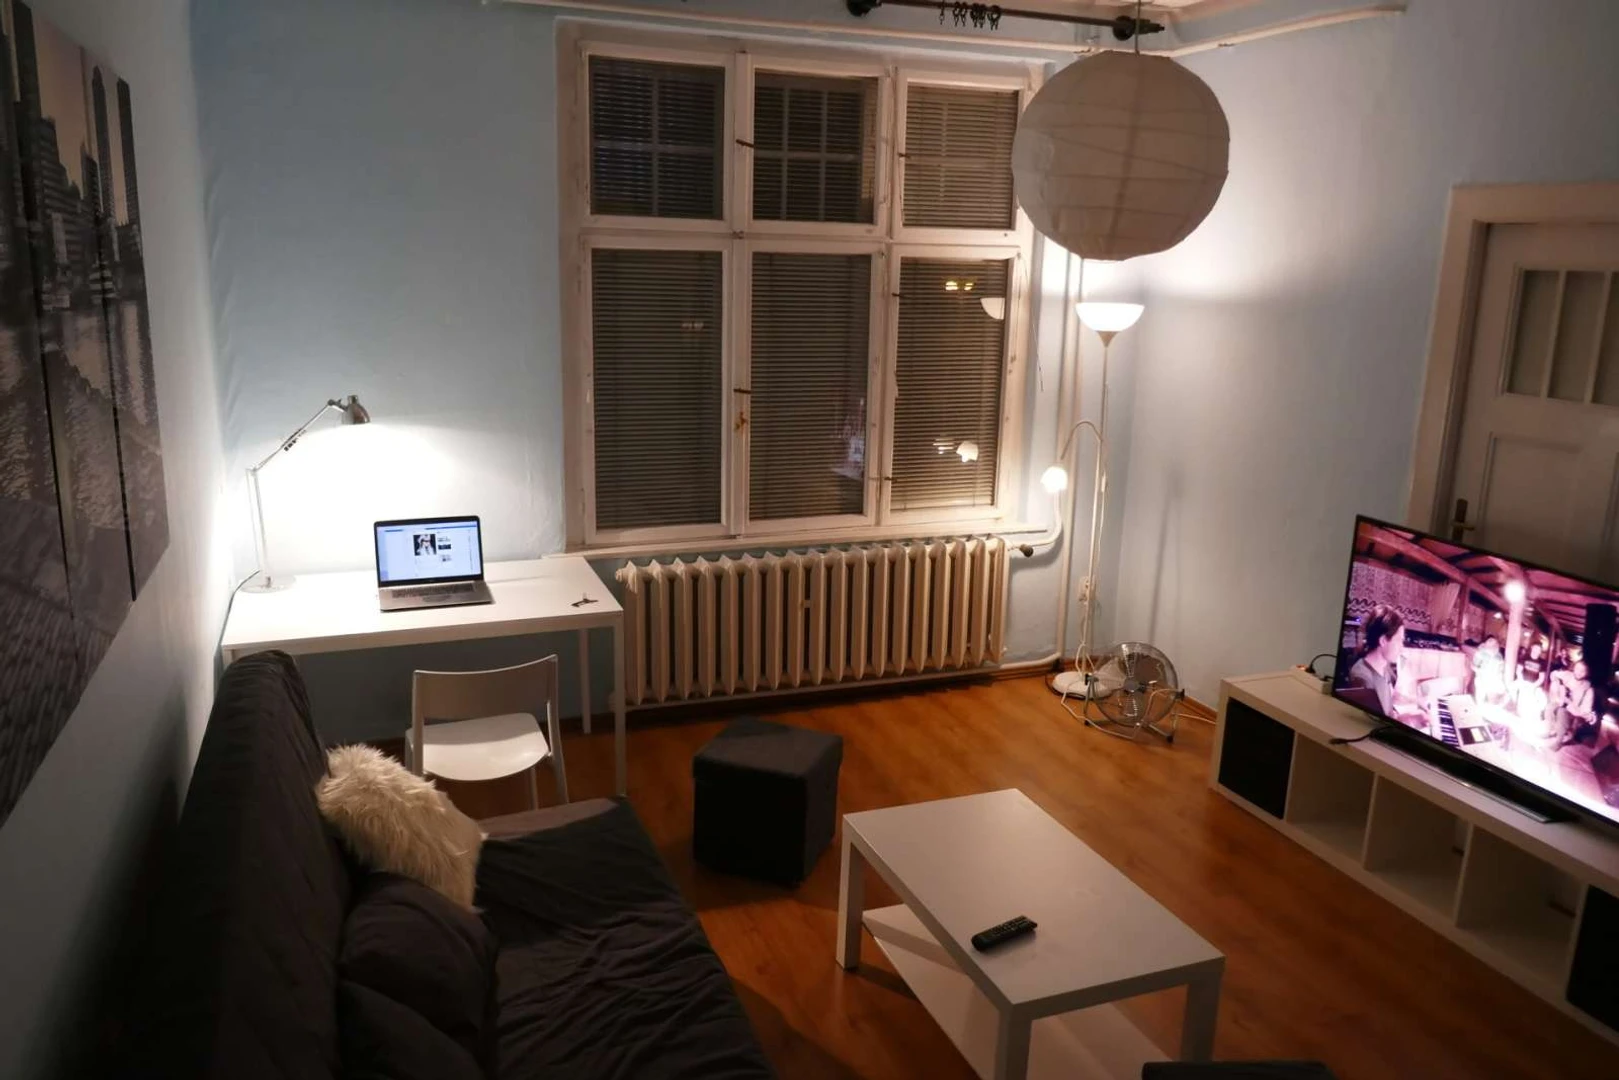 Room for rent in a shared flat in poznan